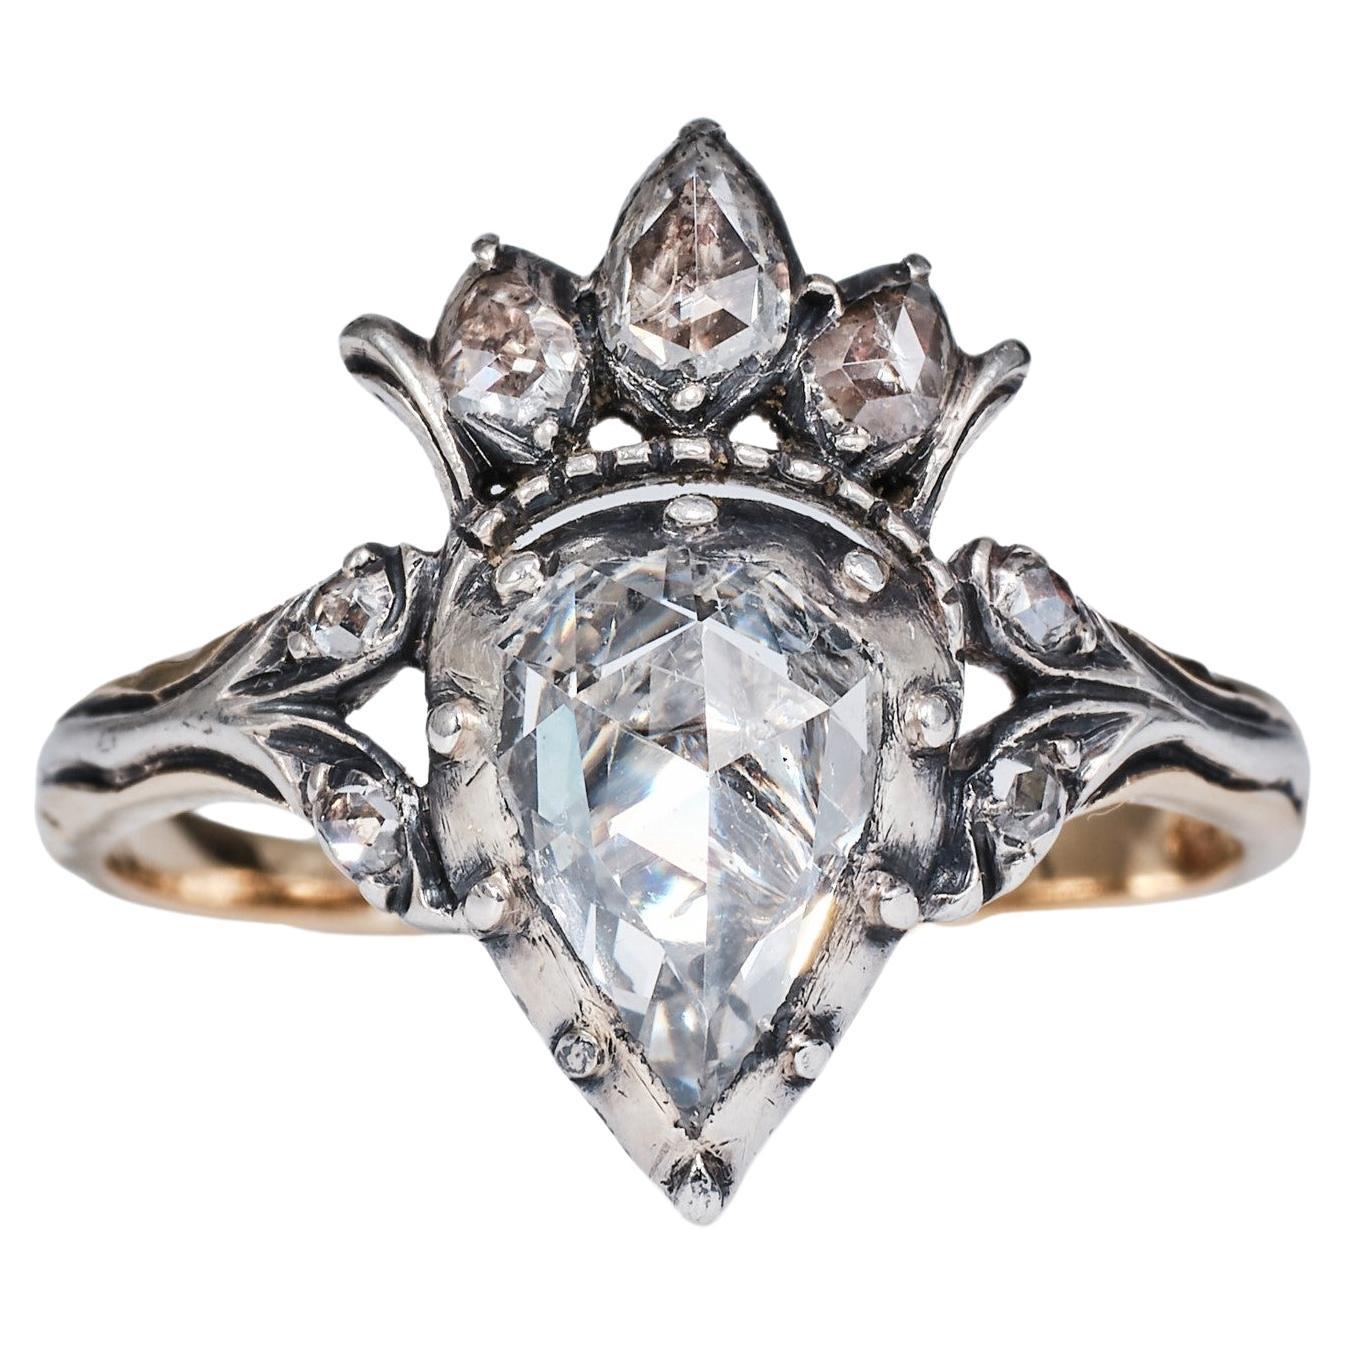 Georgian crowned diamond heart ring from turn of the century 18th/19th century. For Sale